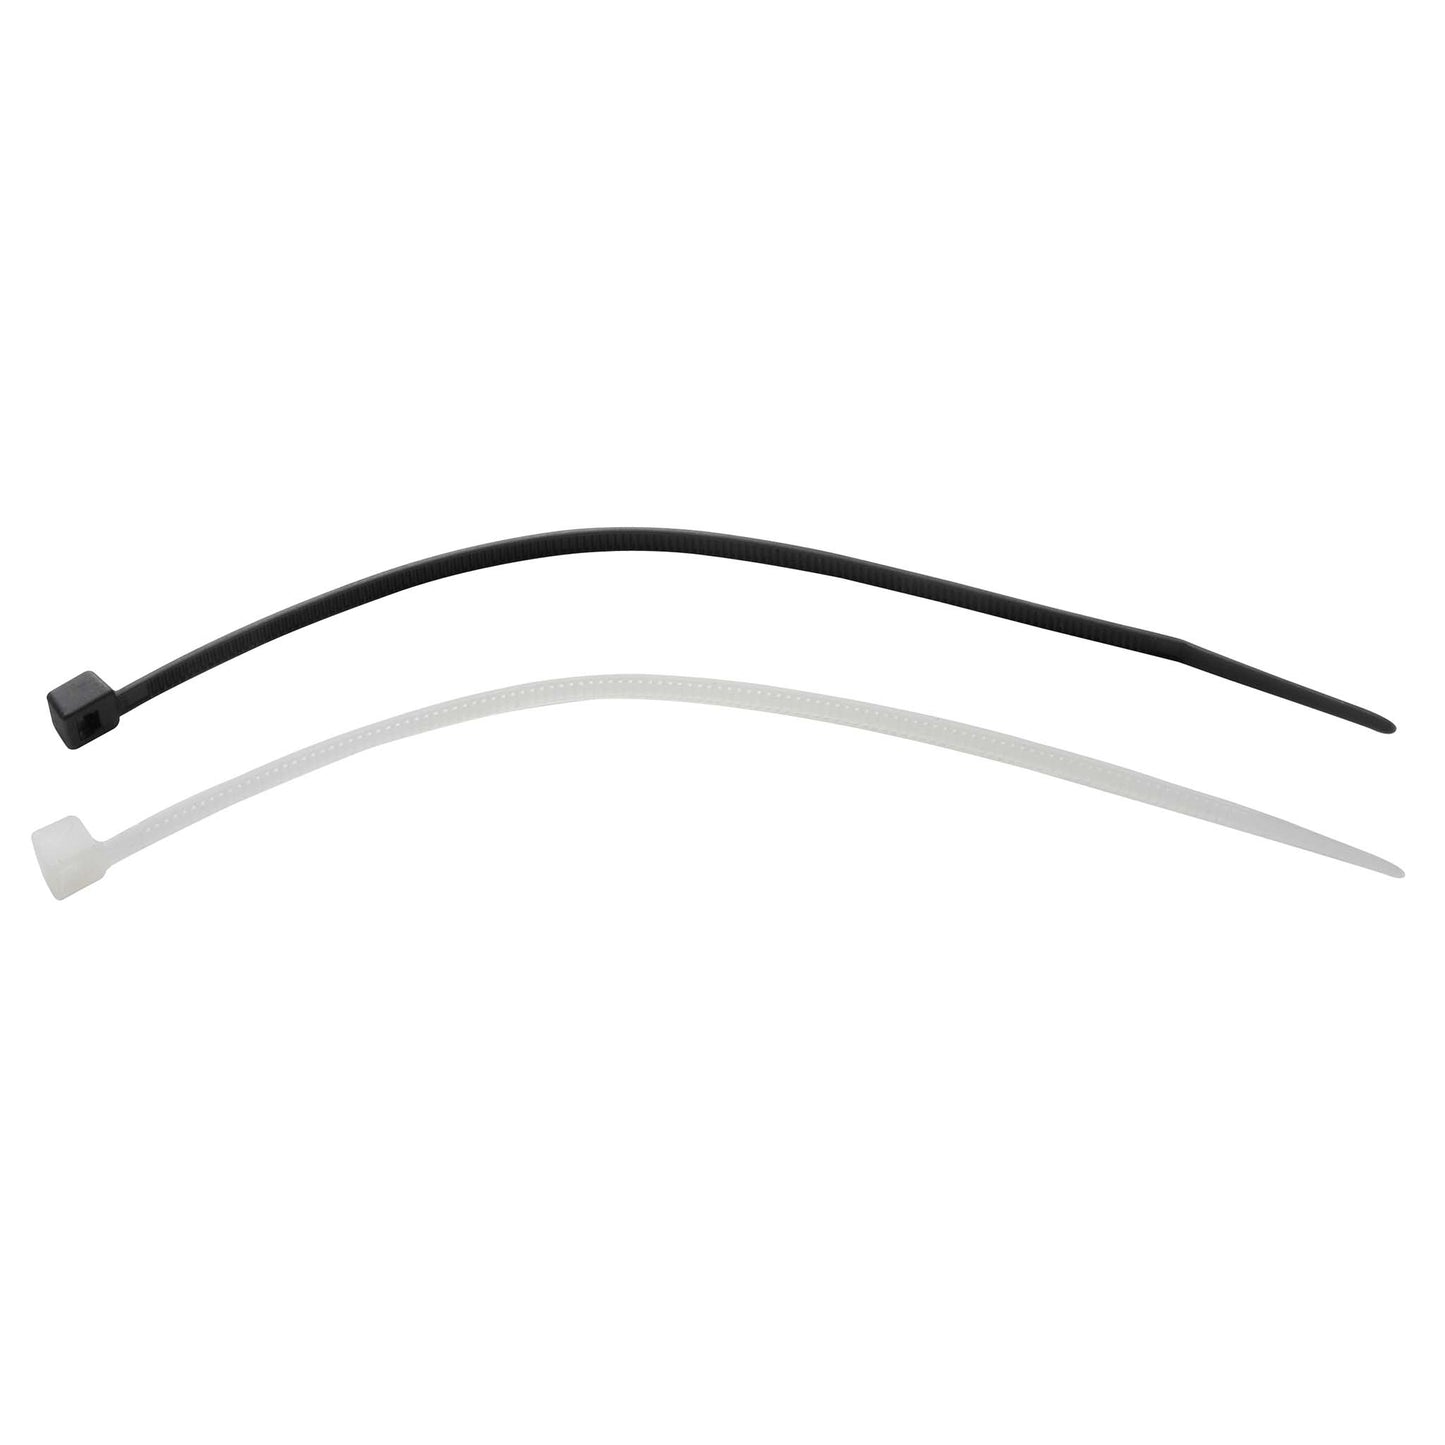 Cable ties 100 x 2.5 mm - black